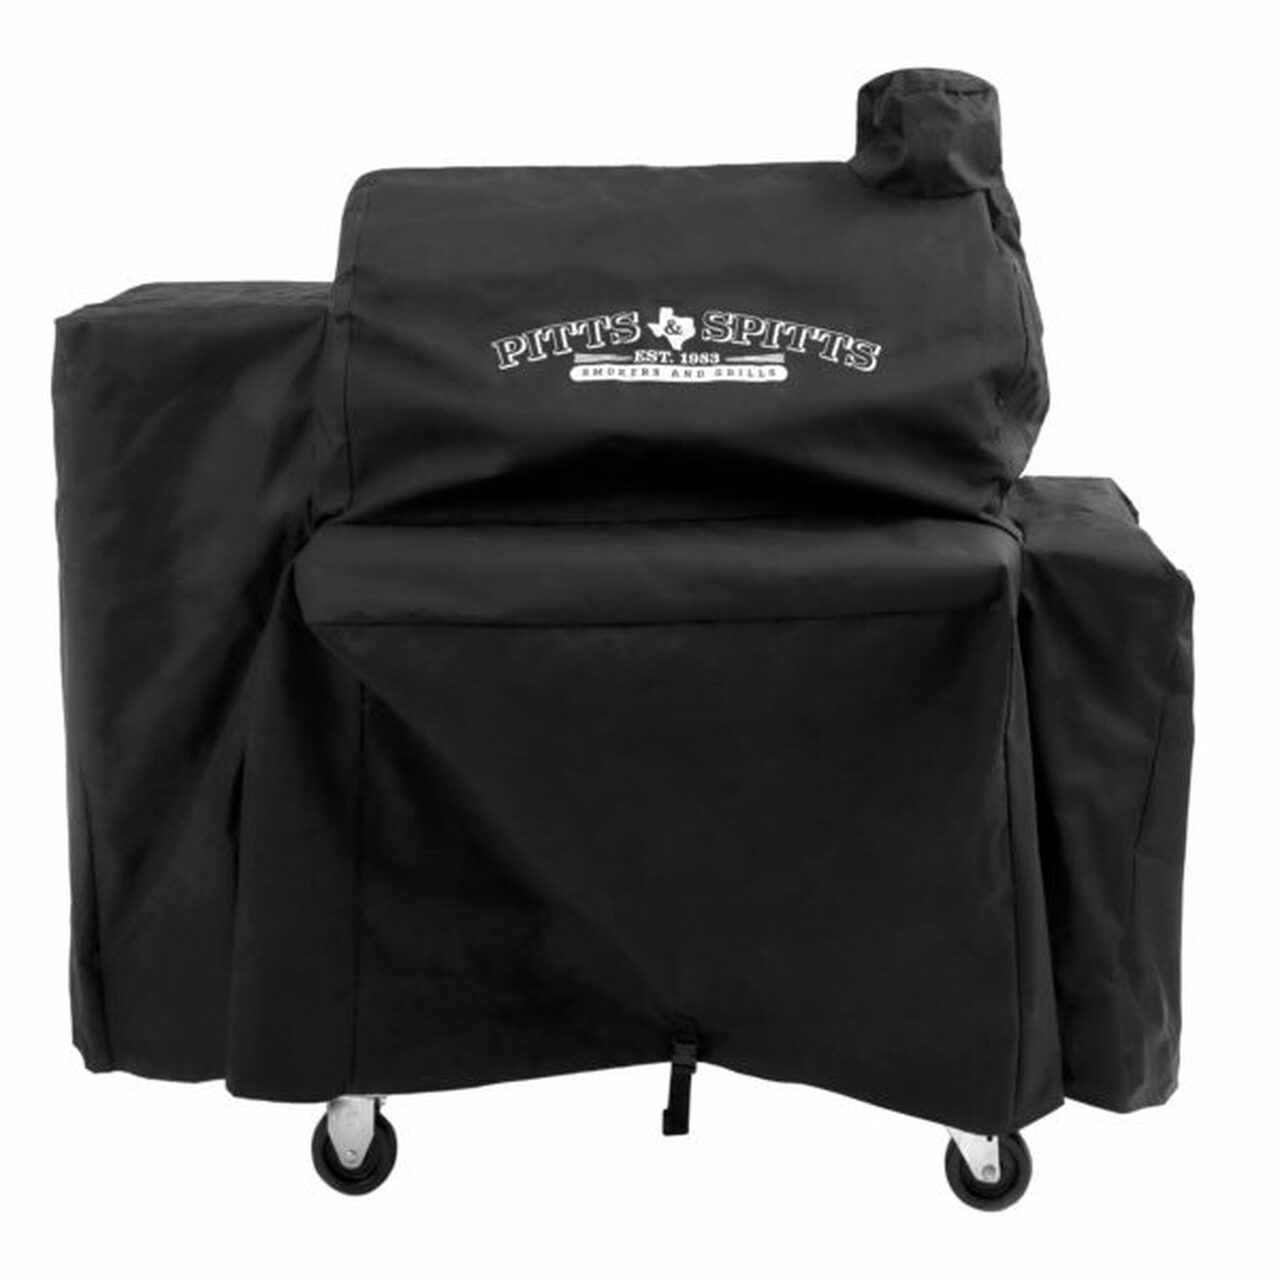 Pitts & Spitts Universal Maverick Grill Cover Pitts & Spitts Indigo Pool Patio BBQ